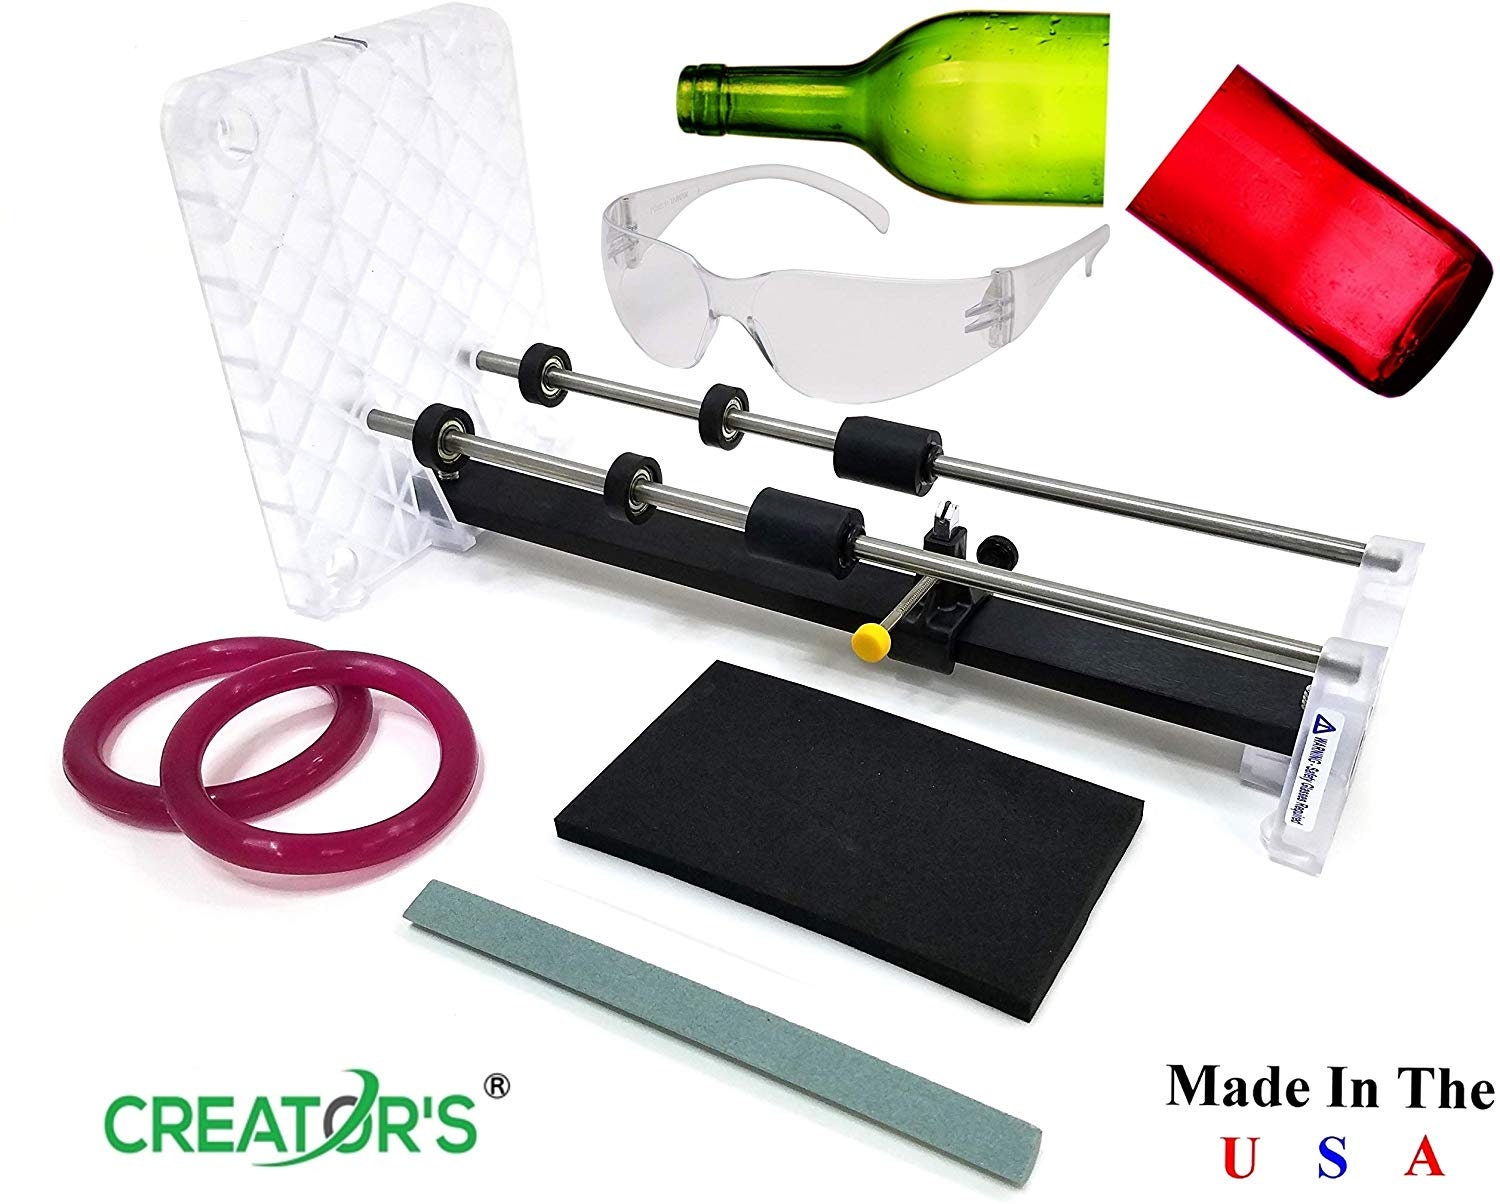 Hands DIY Glass Bottle Cutter Kit Stainless Steel Glass Bottle Cutting  Machine Set Durable Bottle Cutter Tool DIY Craft Recycle Tool for Wine Beer